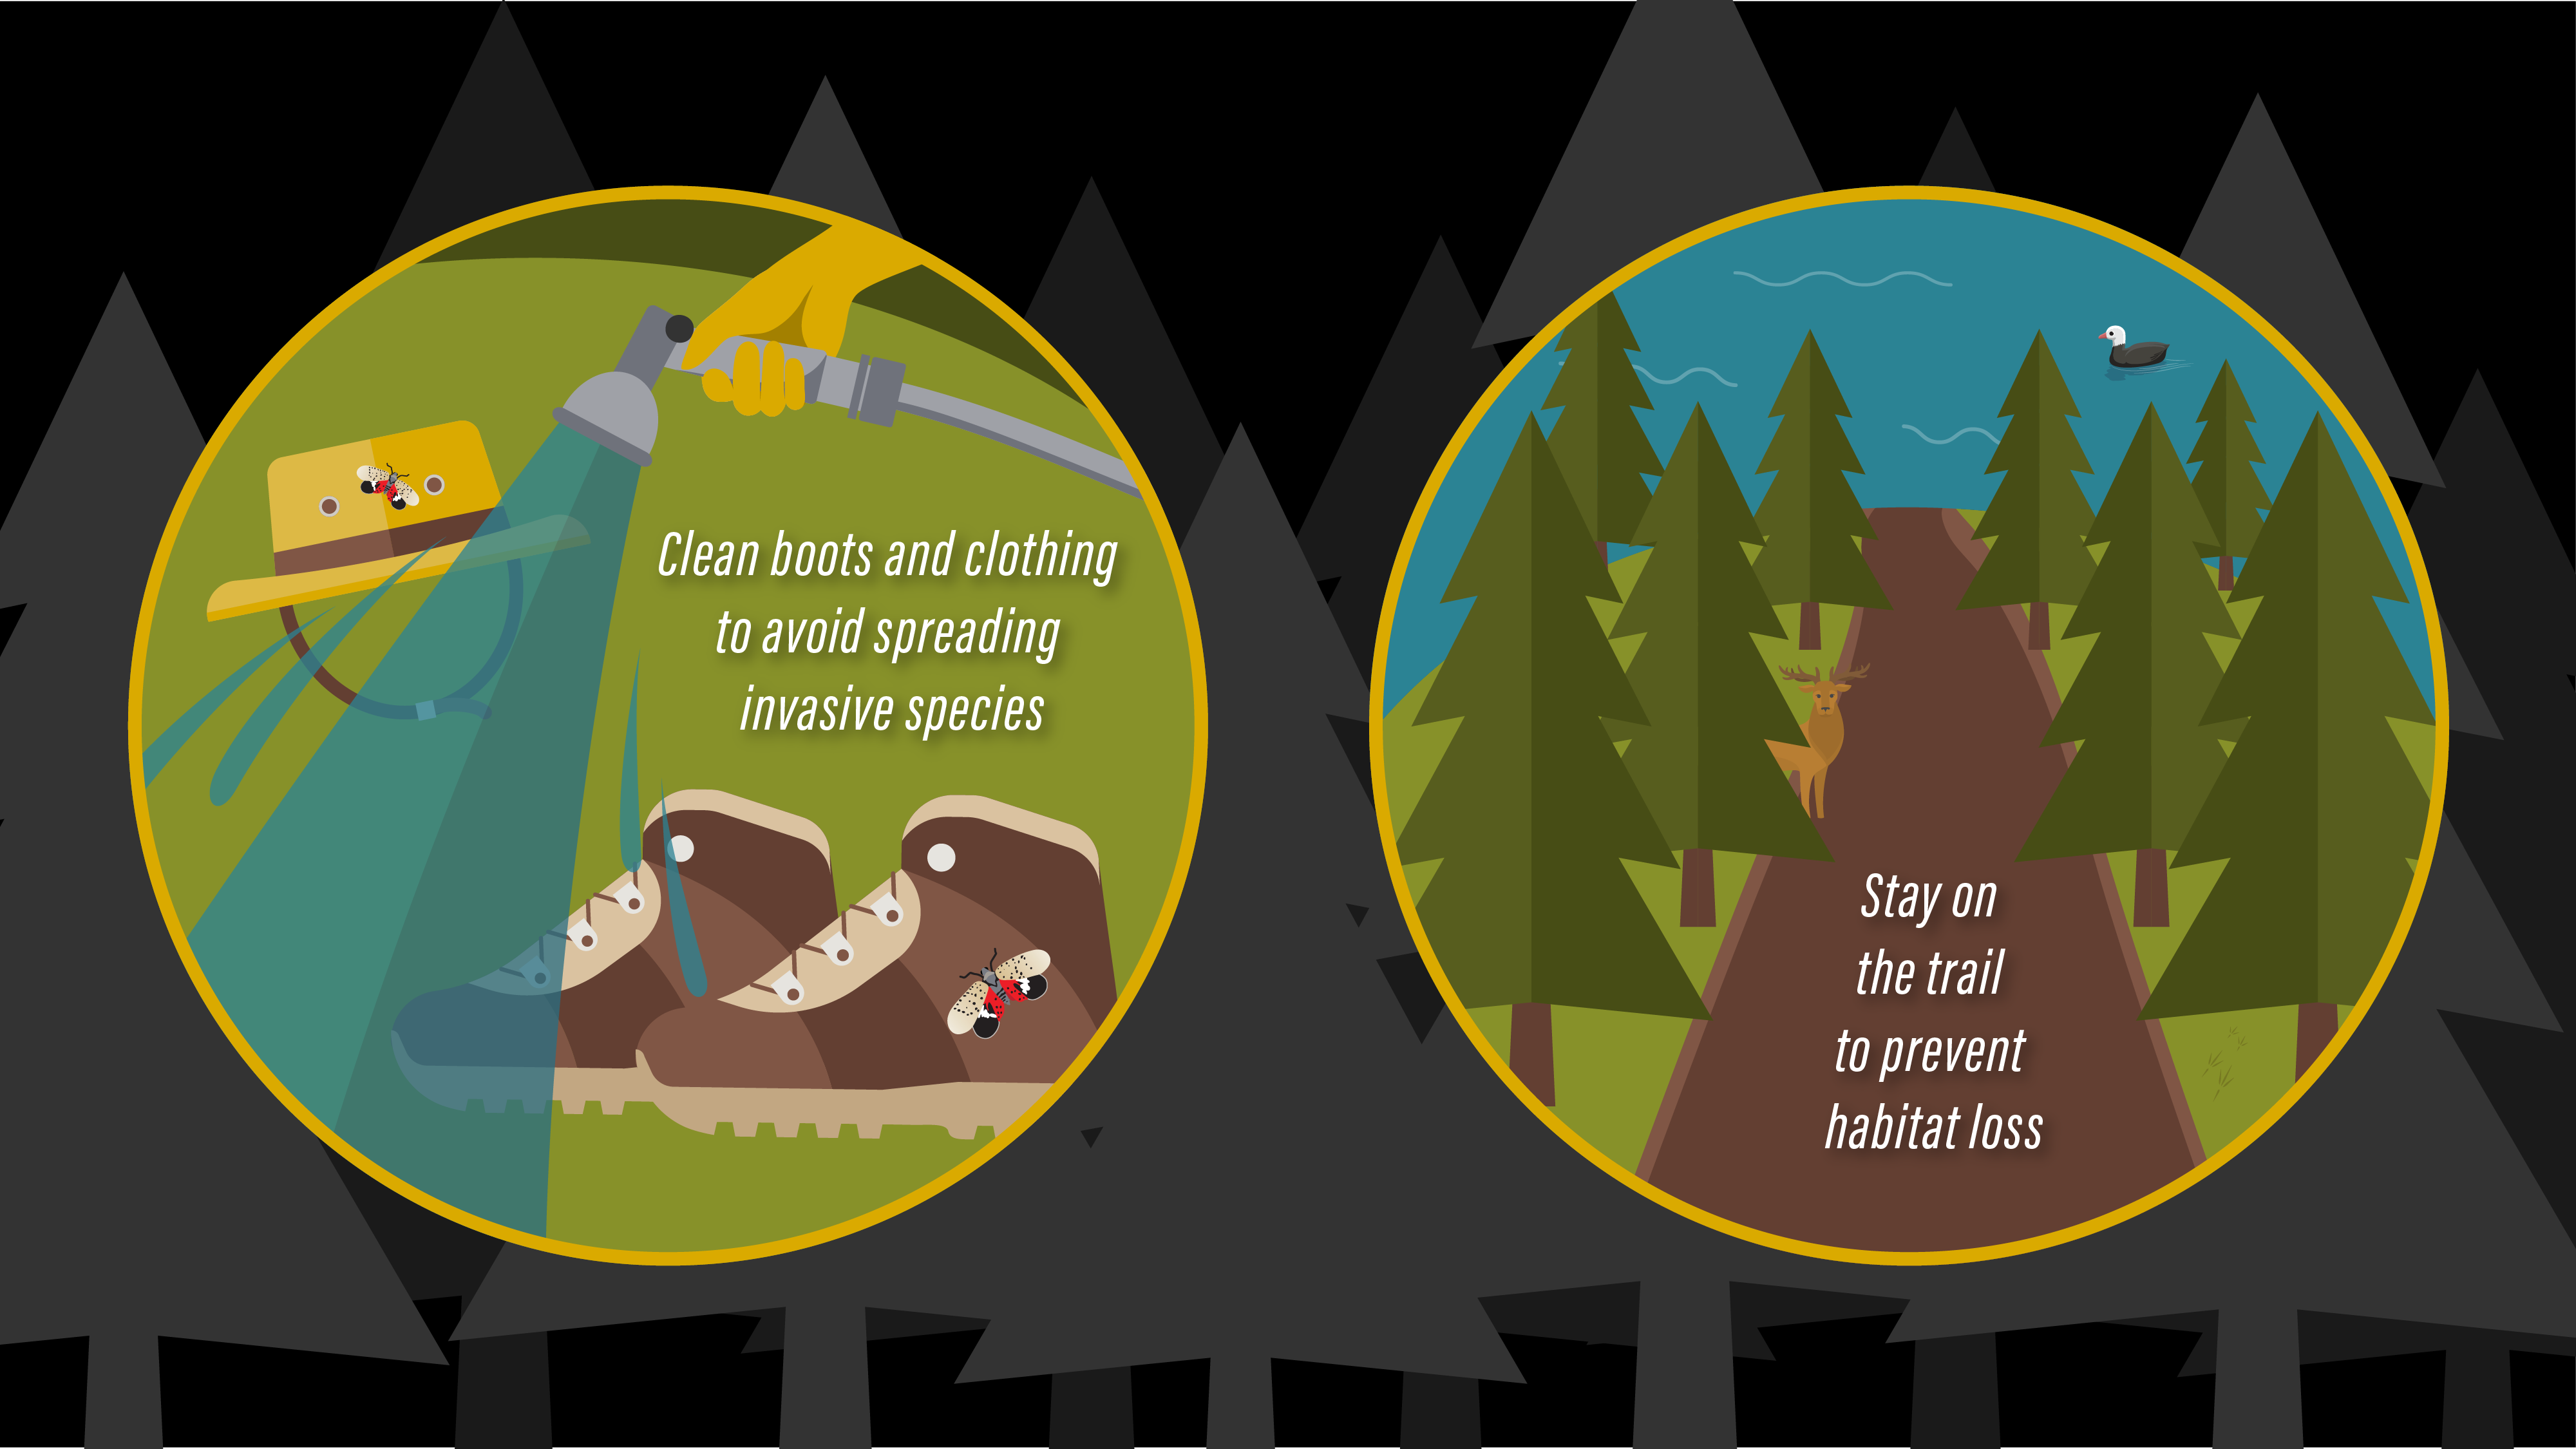 clean boots and clothing to avoid spreading invasive species, stay on the trail to prevent habitat loss